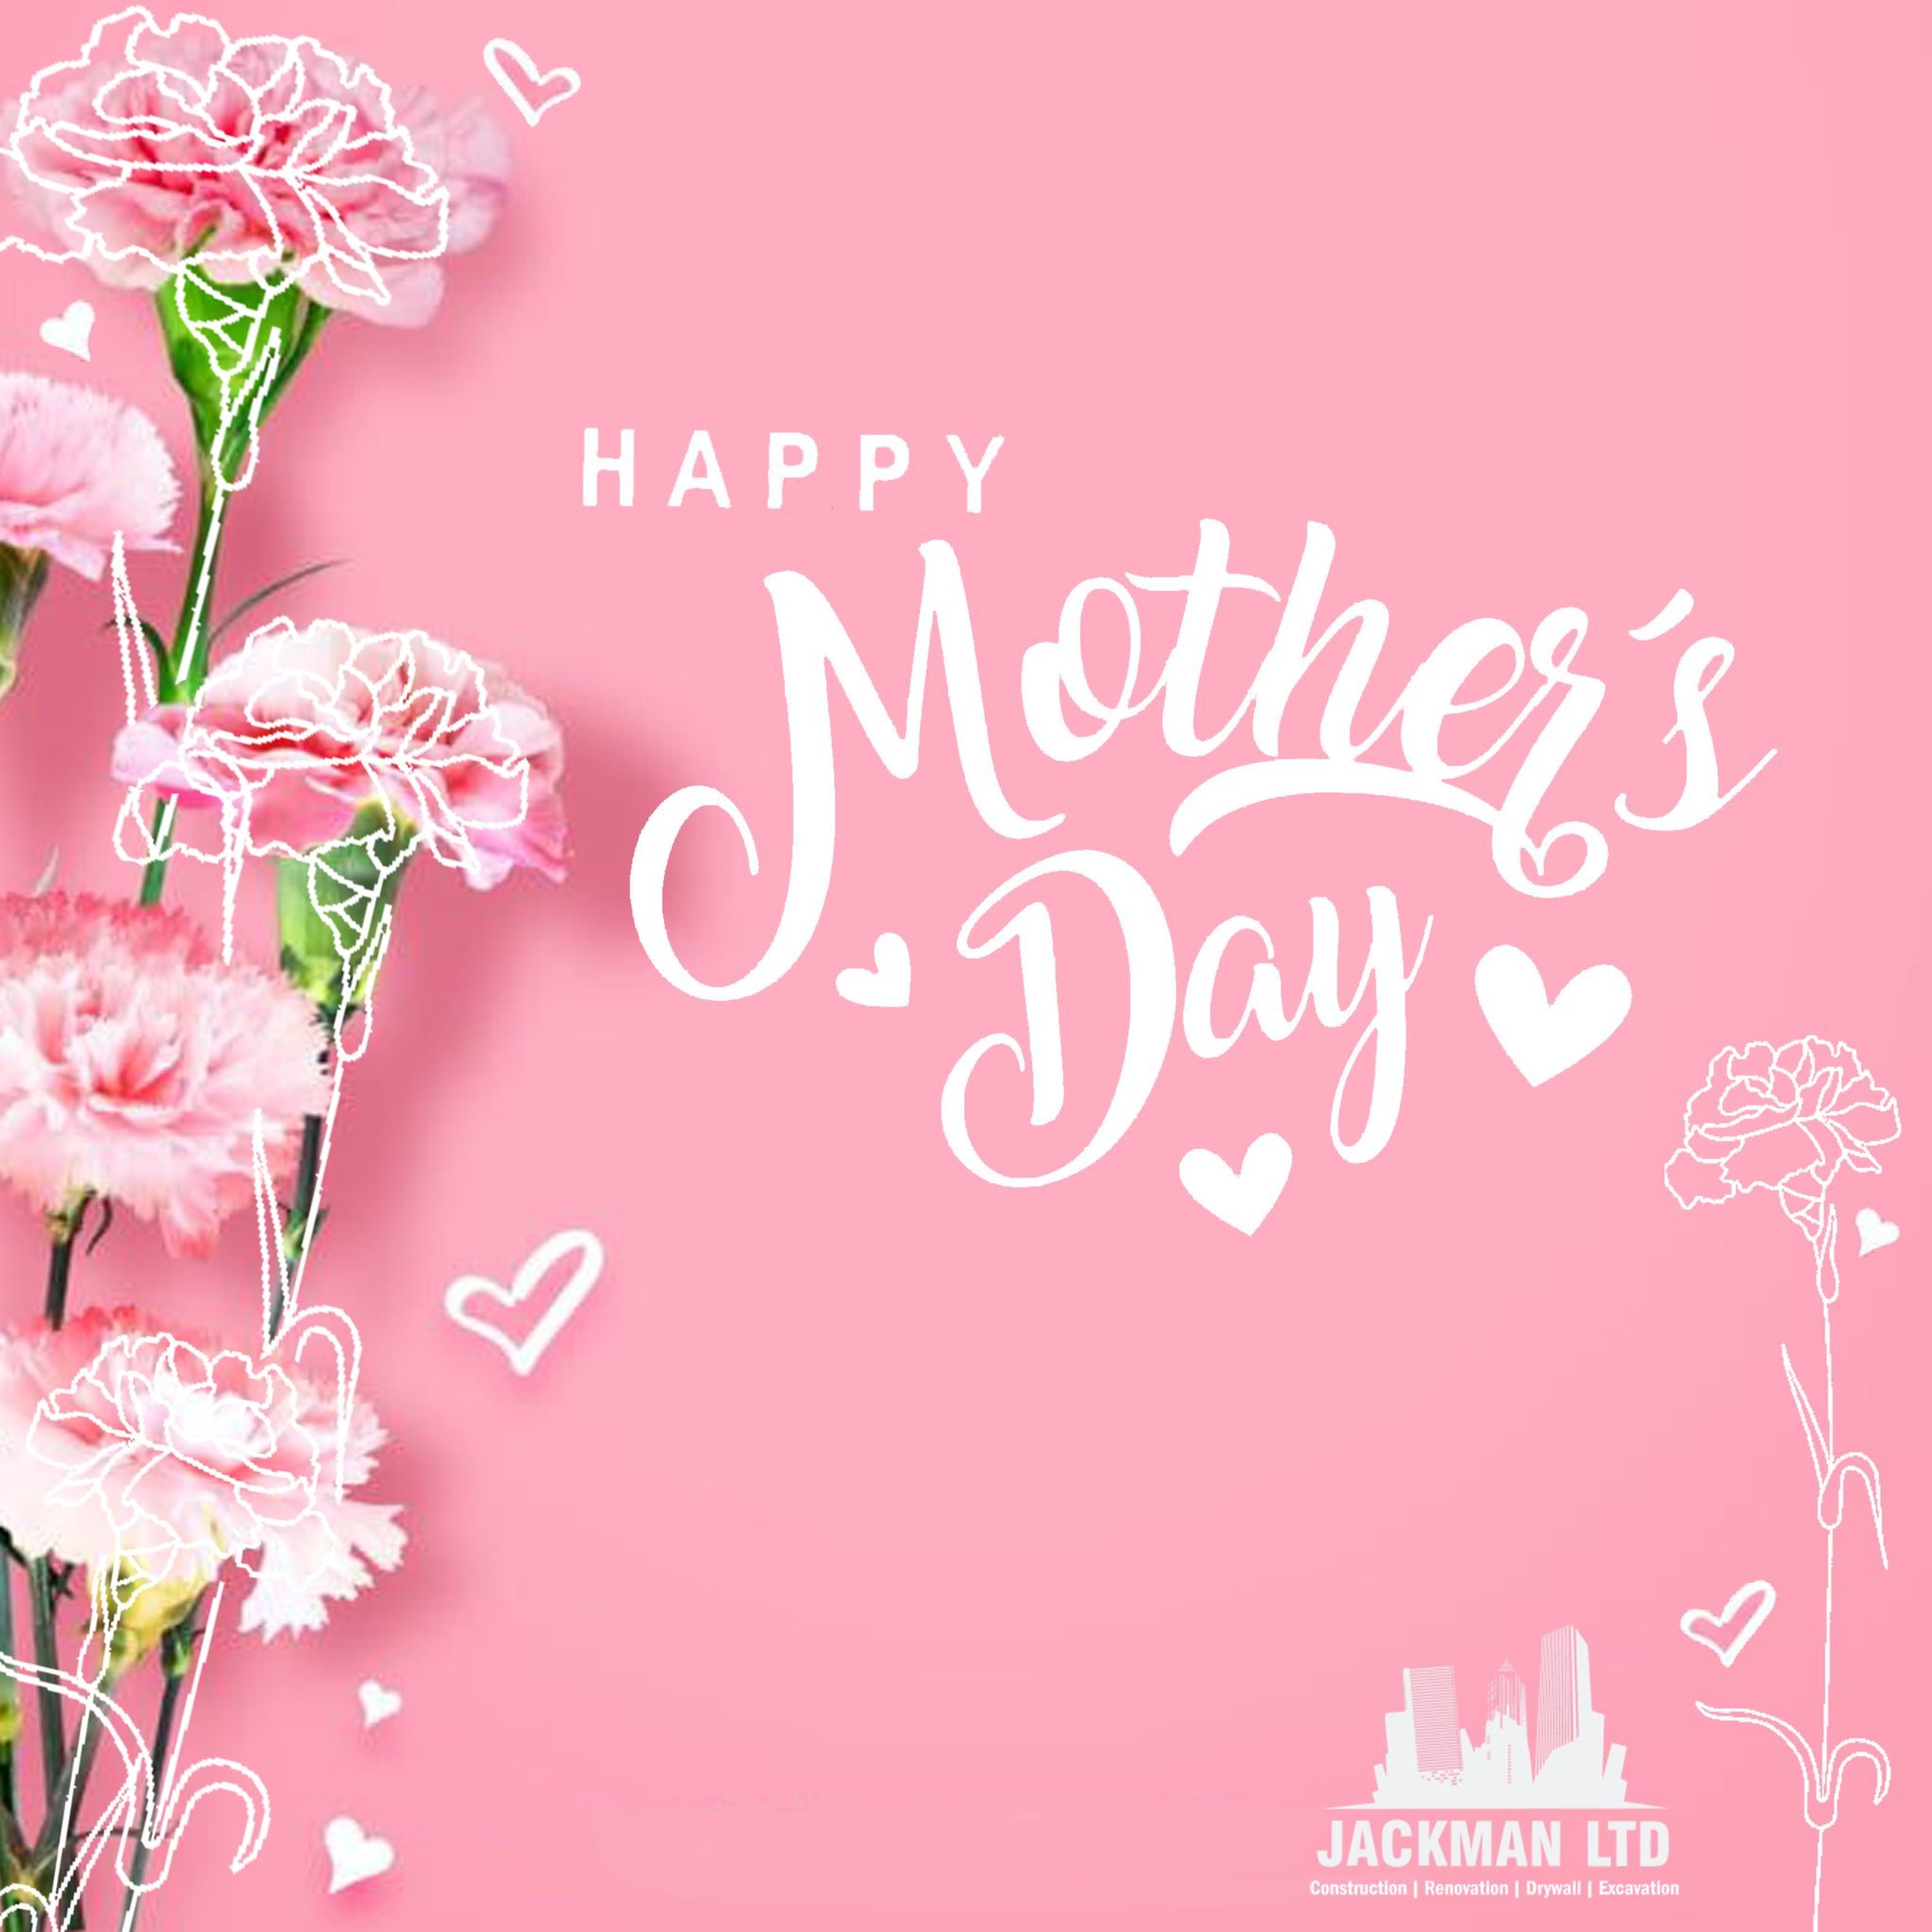 Happy Mother's Day from all of us at Jackman. To all those who are celebrating we wish you a wonderful day filled with all the love you can handle, especially when you give it out every day, all year round! #mothersday #celebrate #spreadlove